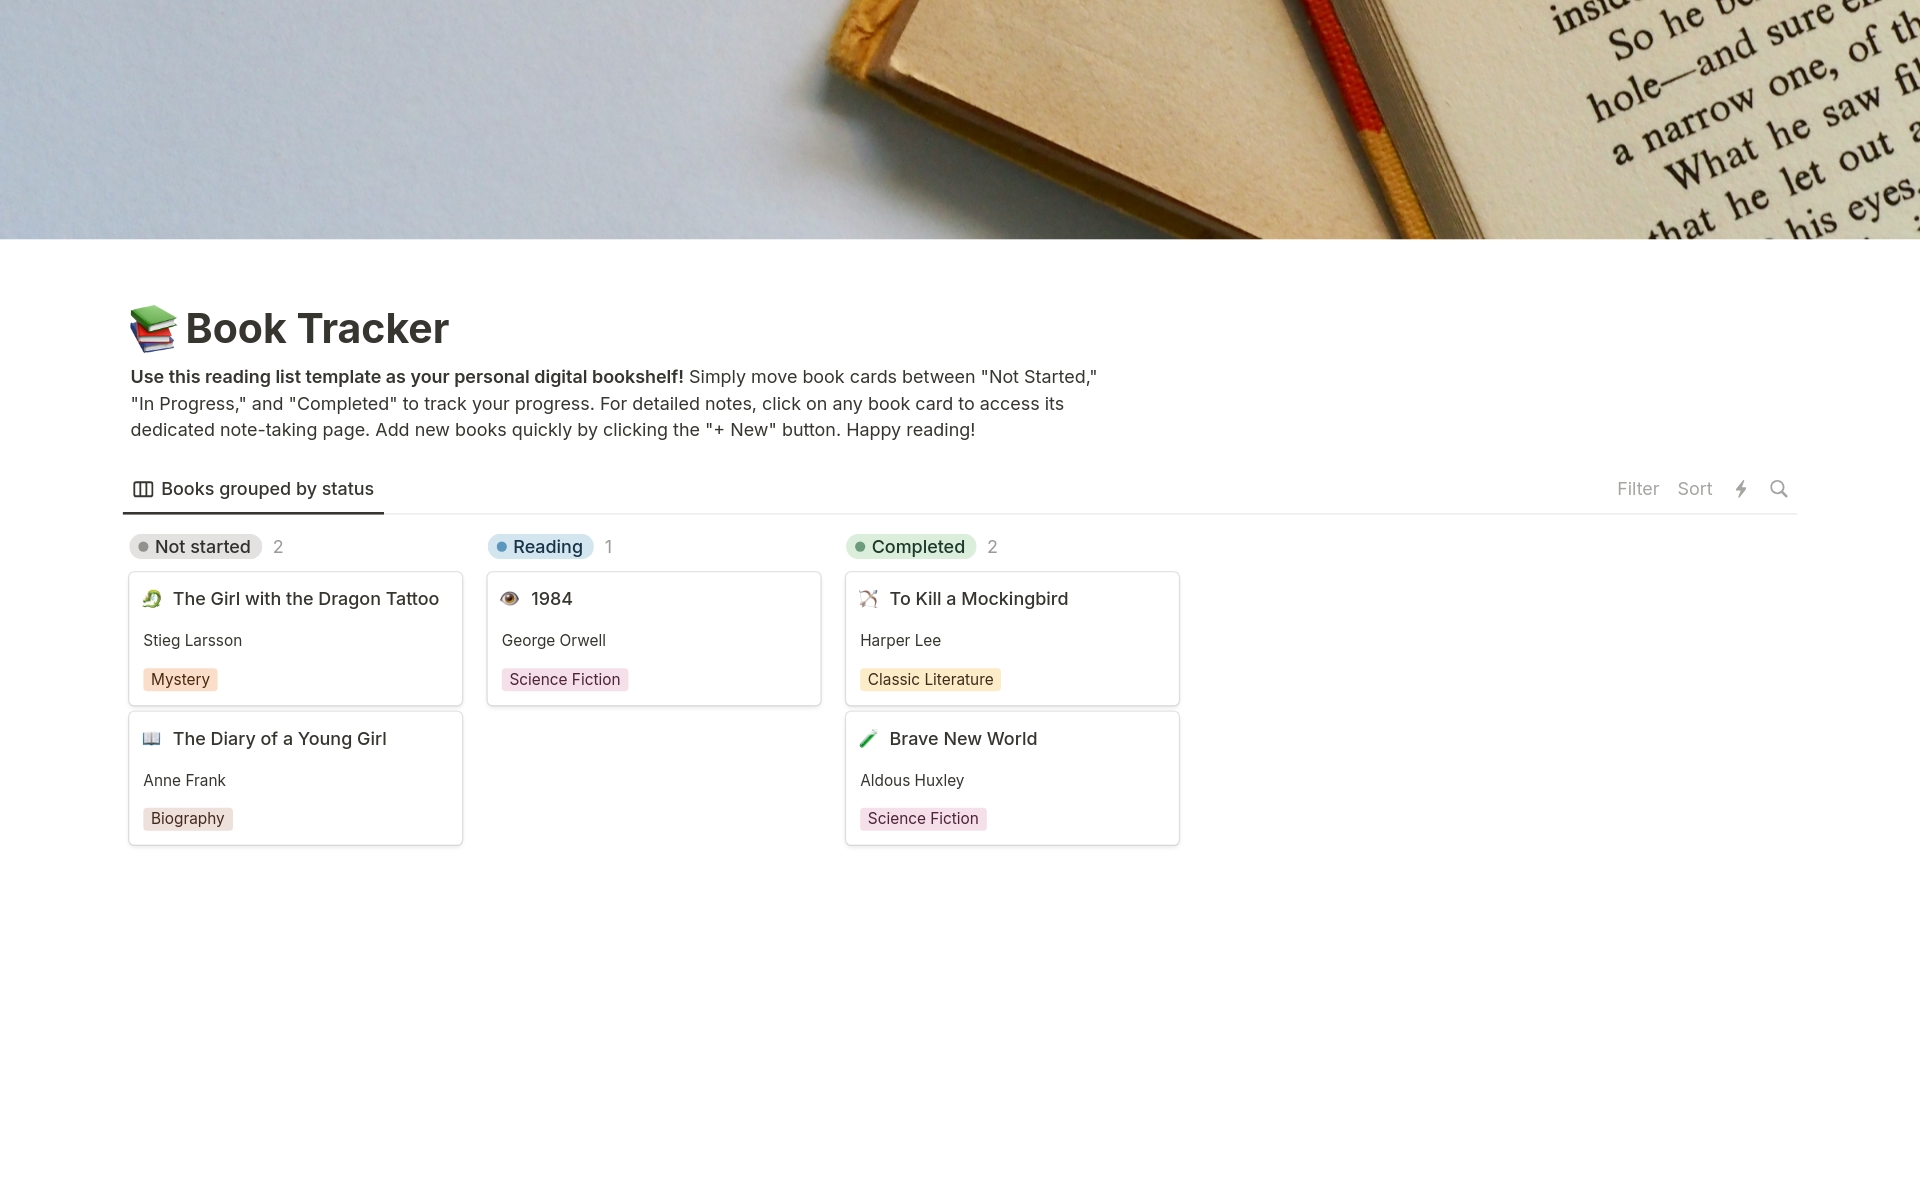 Keep all your books in one place with our Book Tracker template! Sort your books into categories: currently reading, finished, or up next. Click on any book to take notes and save your thoughts. Happy reading!